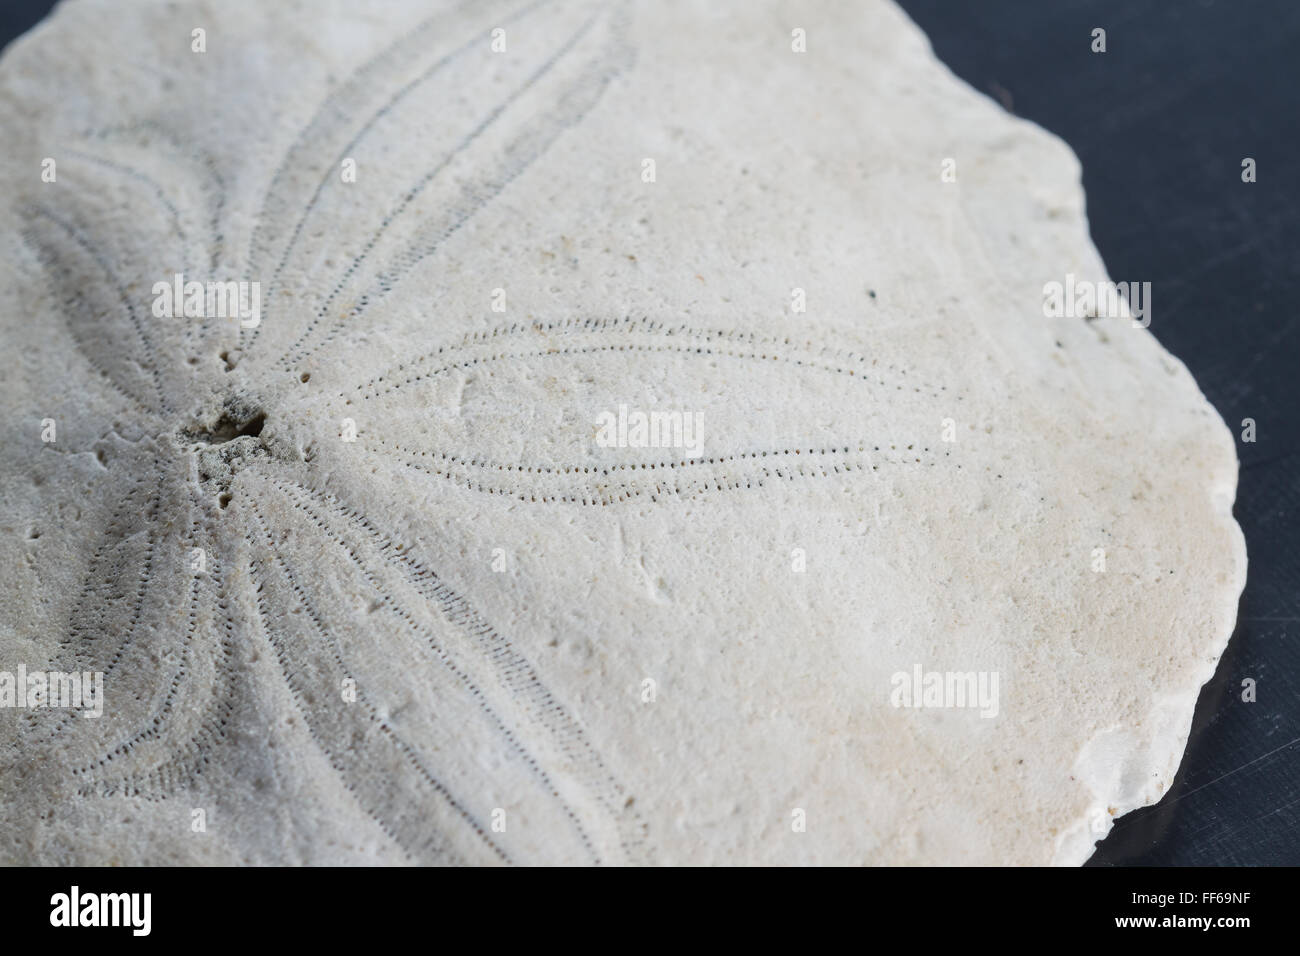 old sand dollar or starfish close up with interesting texture and pattern Stock Photo